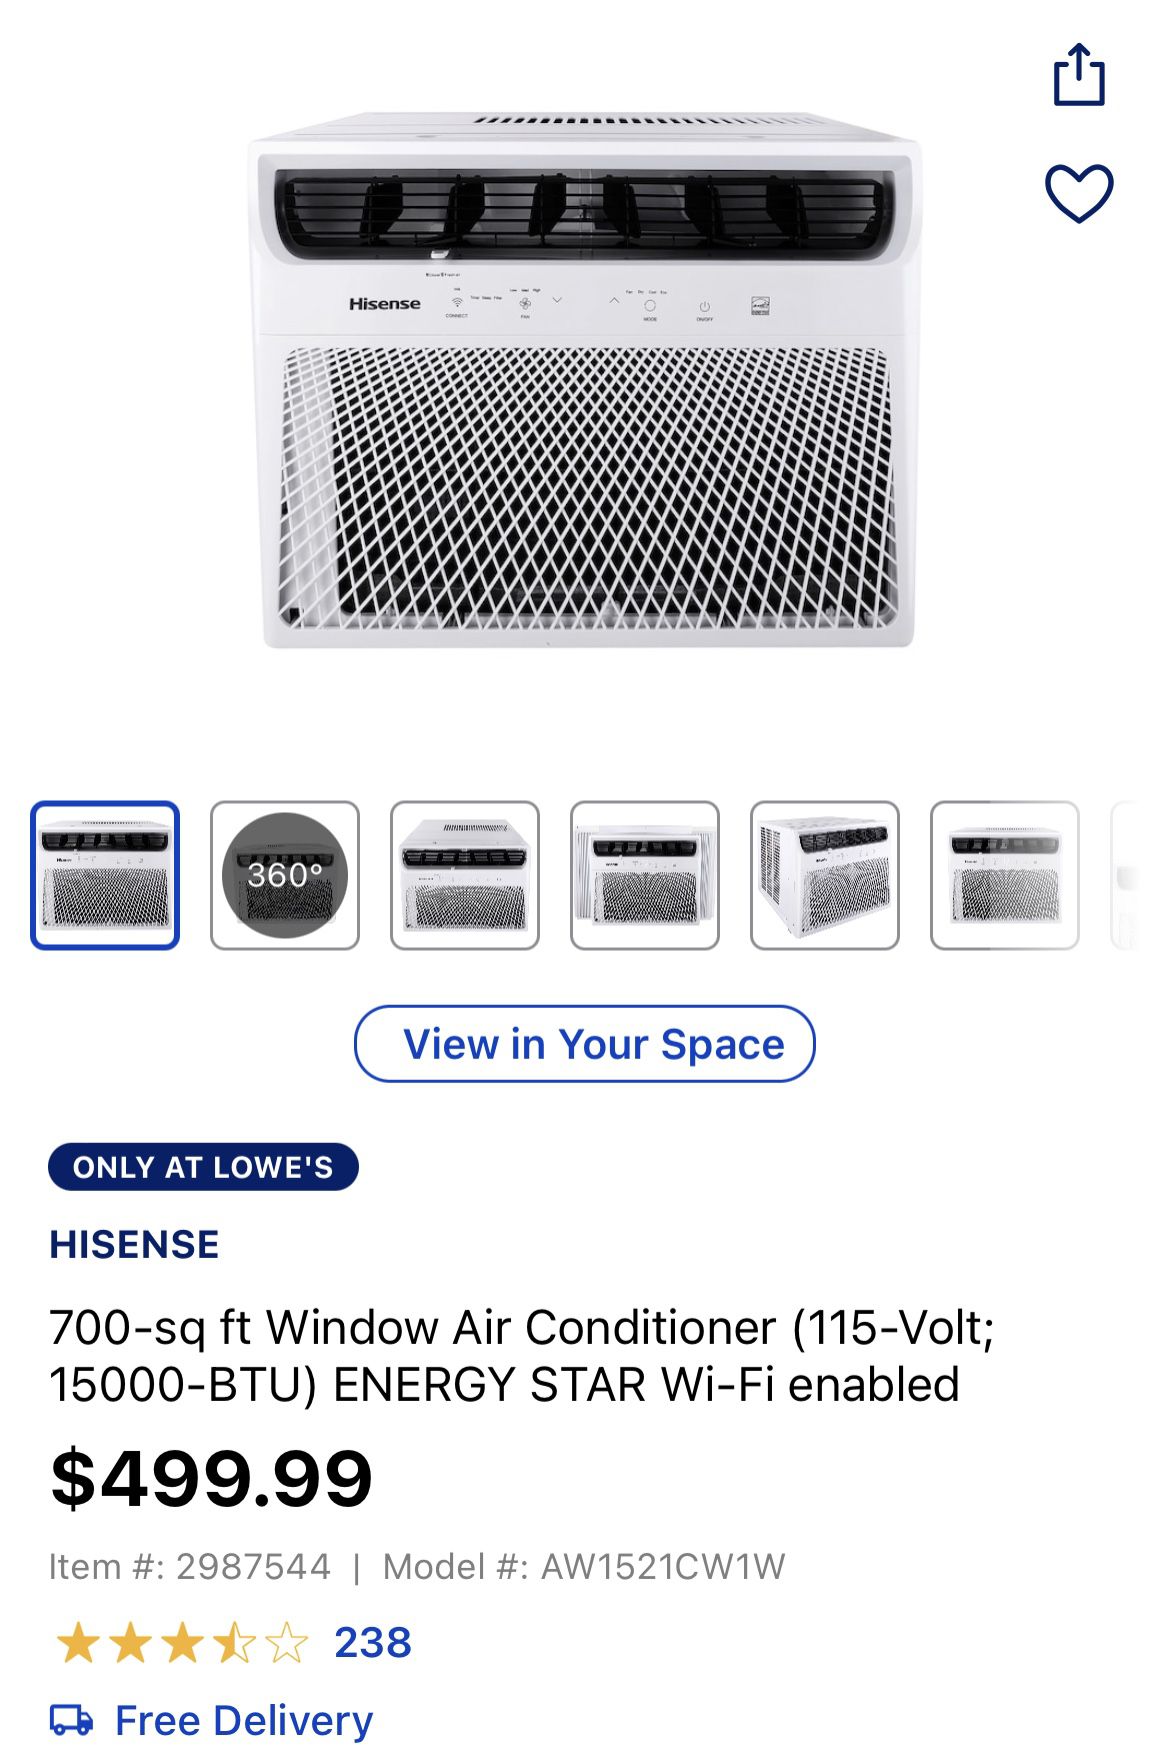 HISENSE 700-sq ft Window Air Conditioner (115-Volt; 15000-BTU) ENERGY STAR Wi-Fi enabled $499.99 Item #: (contact info removed) | Model #: AW1521CW1W